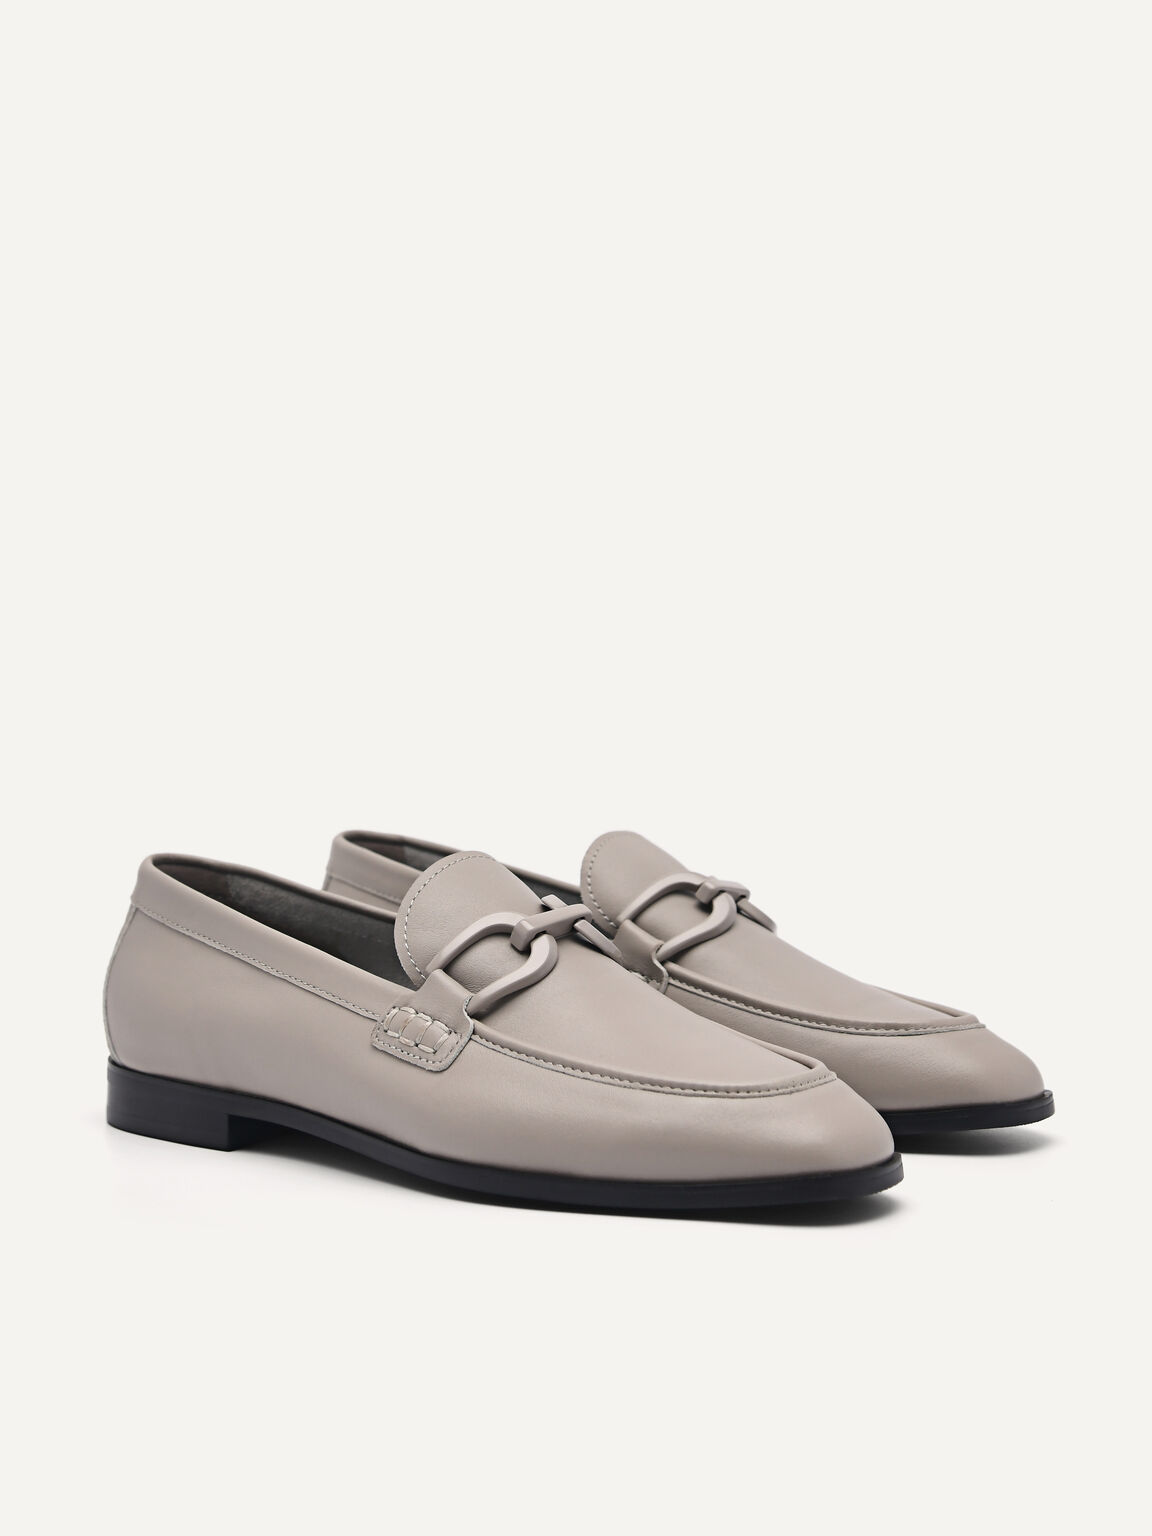 PEDRO Studio Kate Leather Loafers, Grey